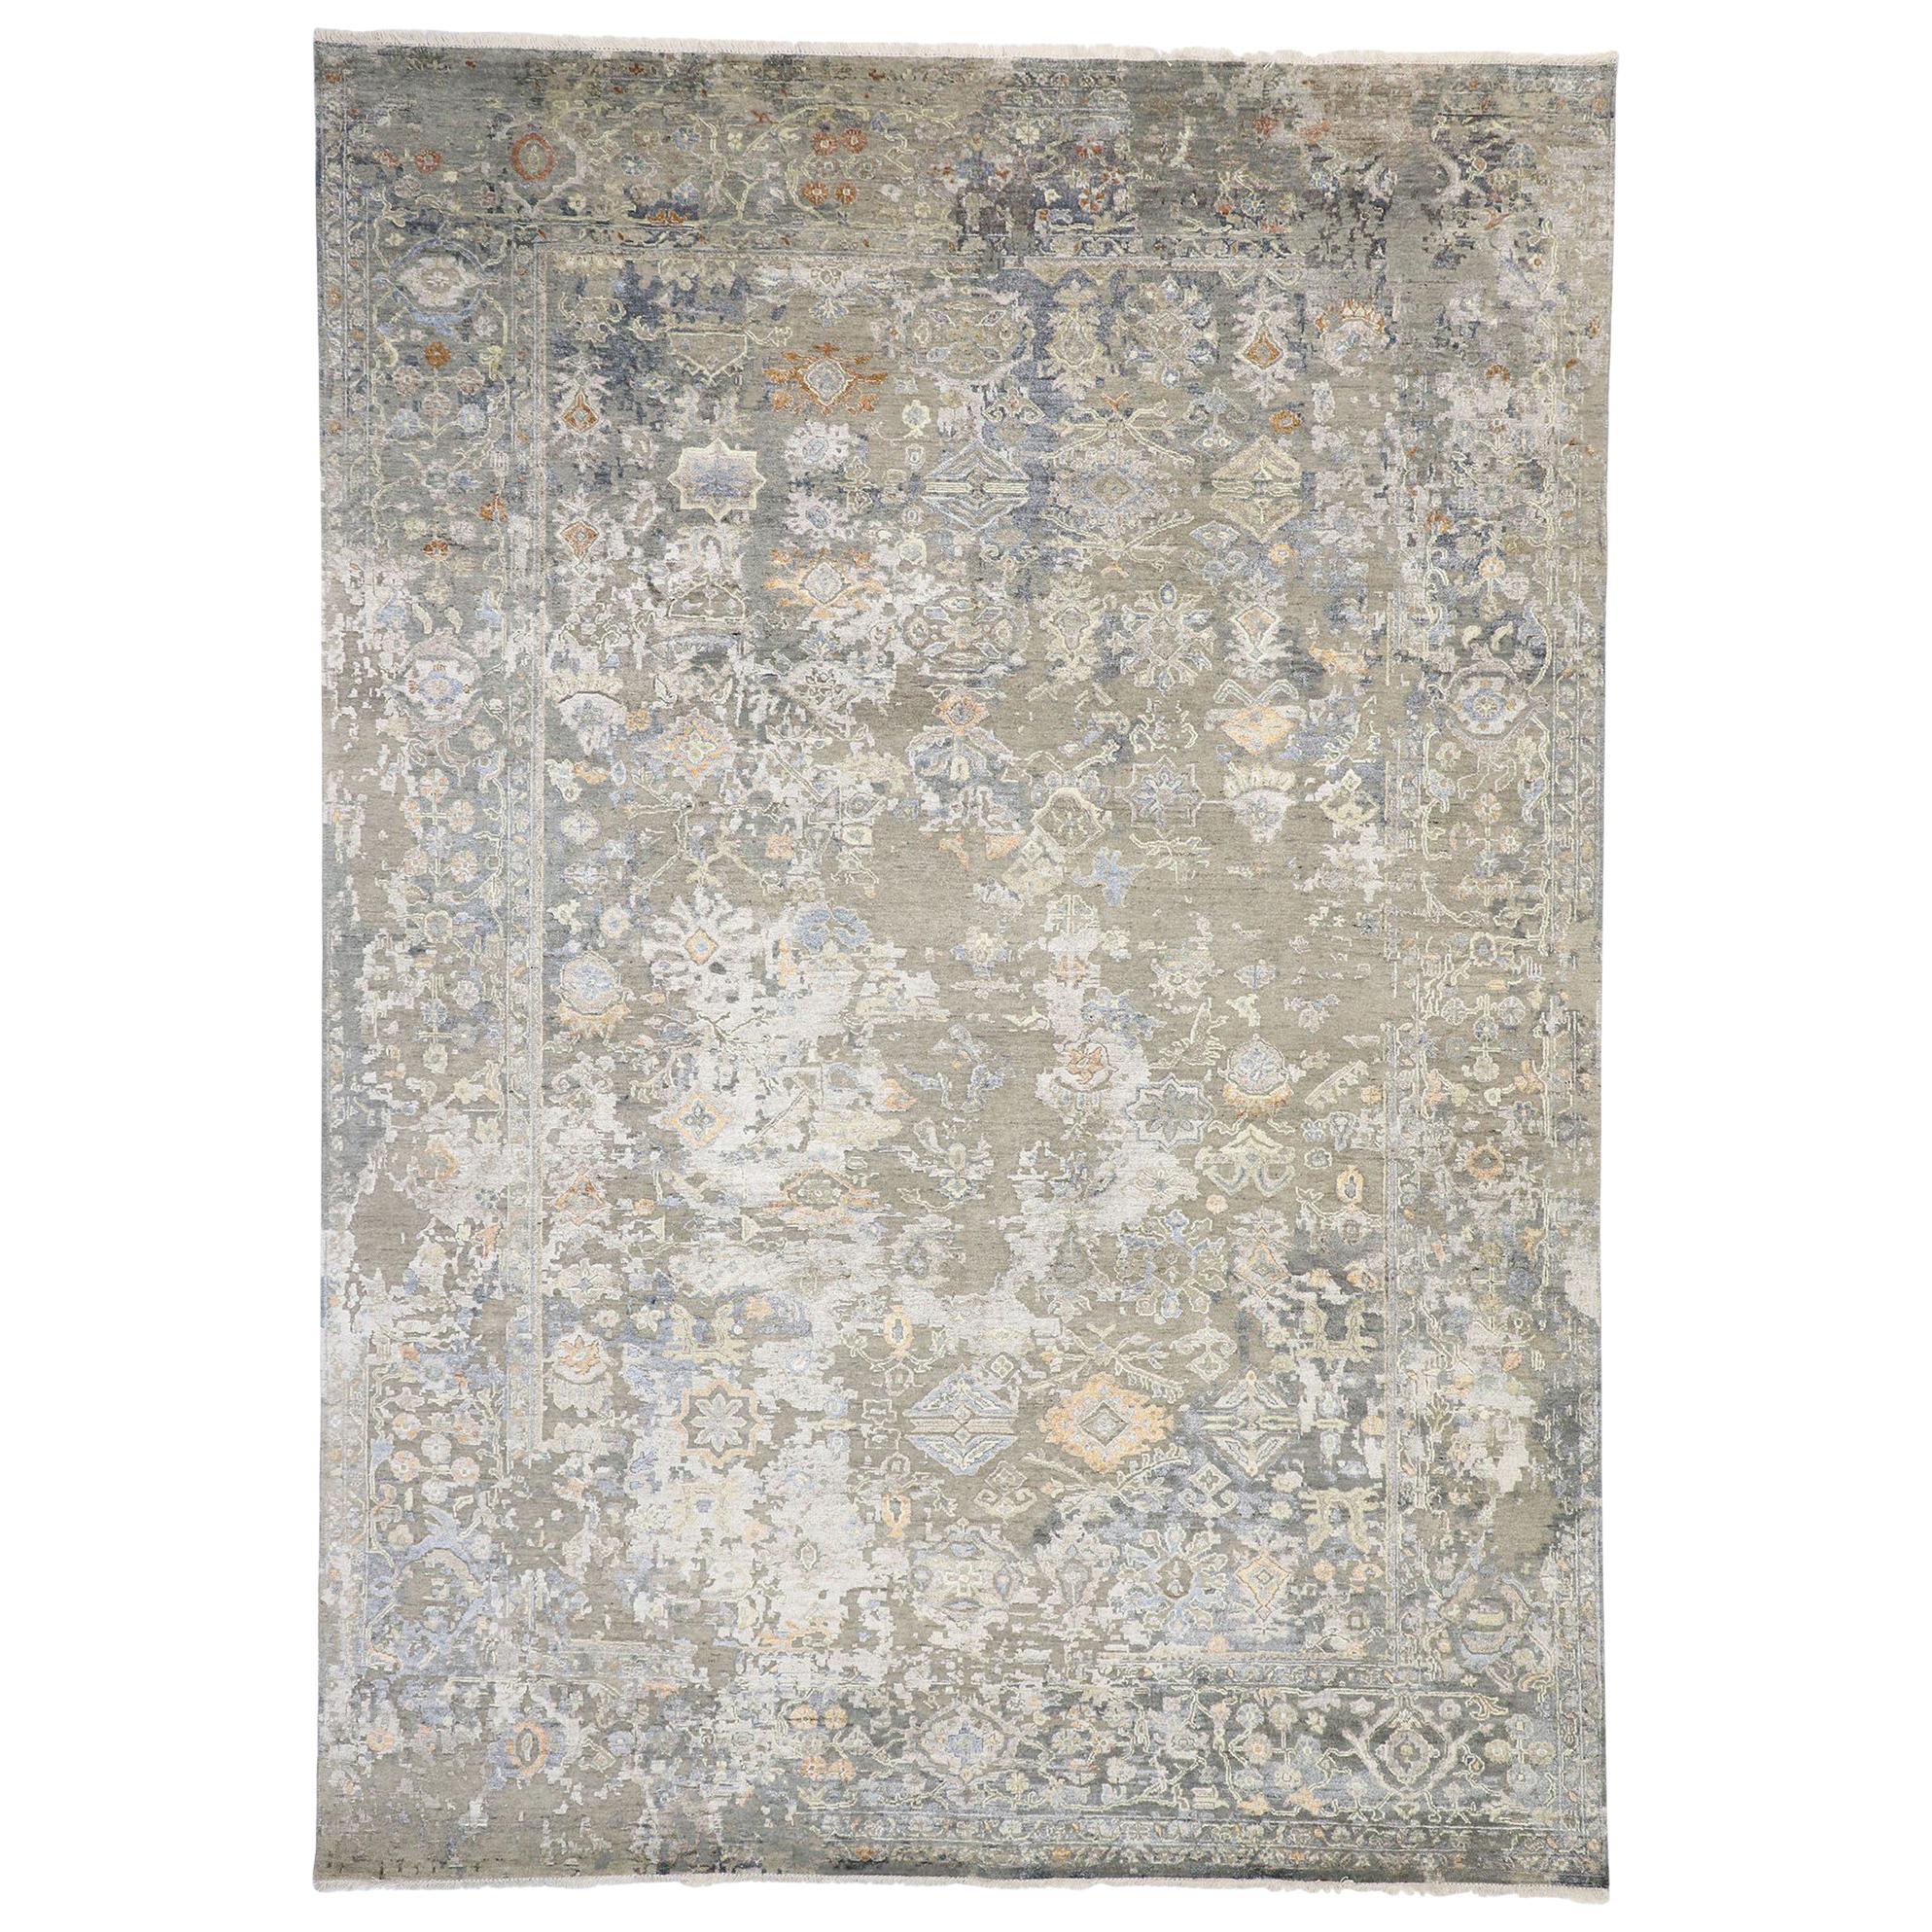 New Transitional Area Rug with Oushak Pattern and Transitional Bungalow Style